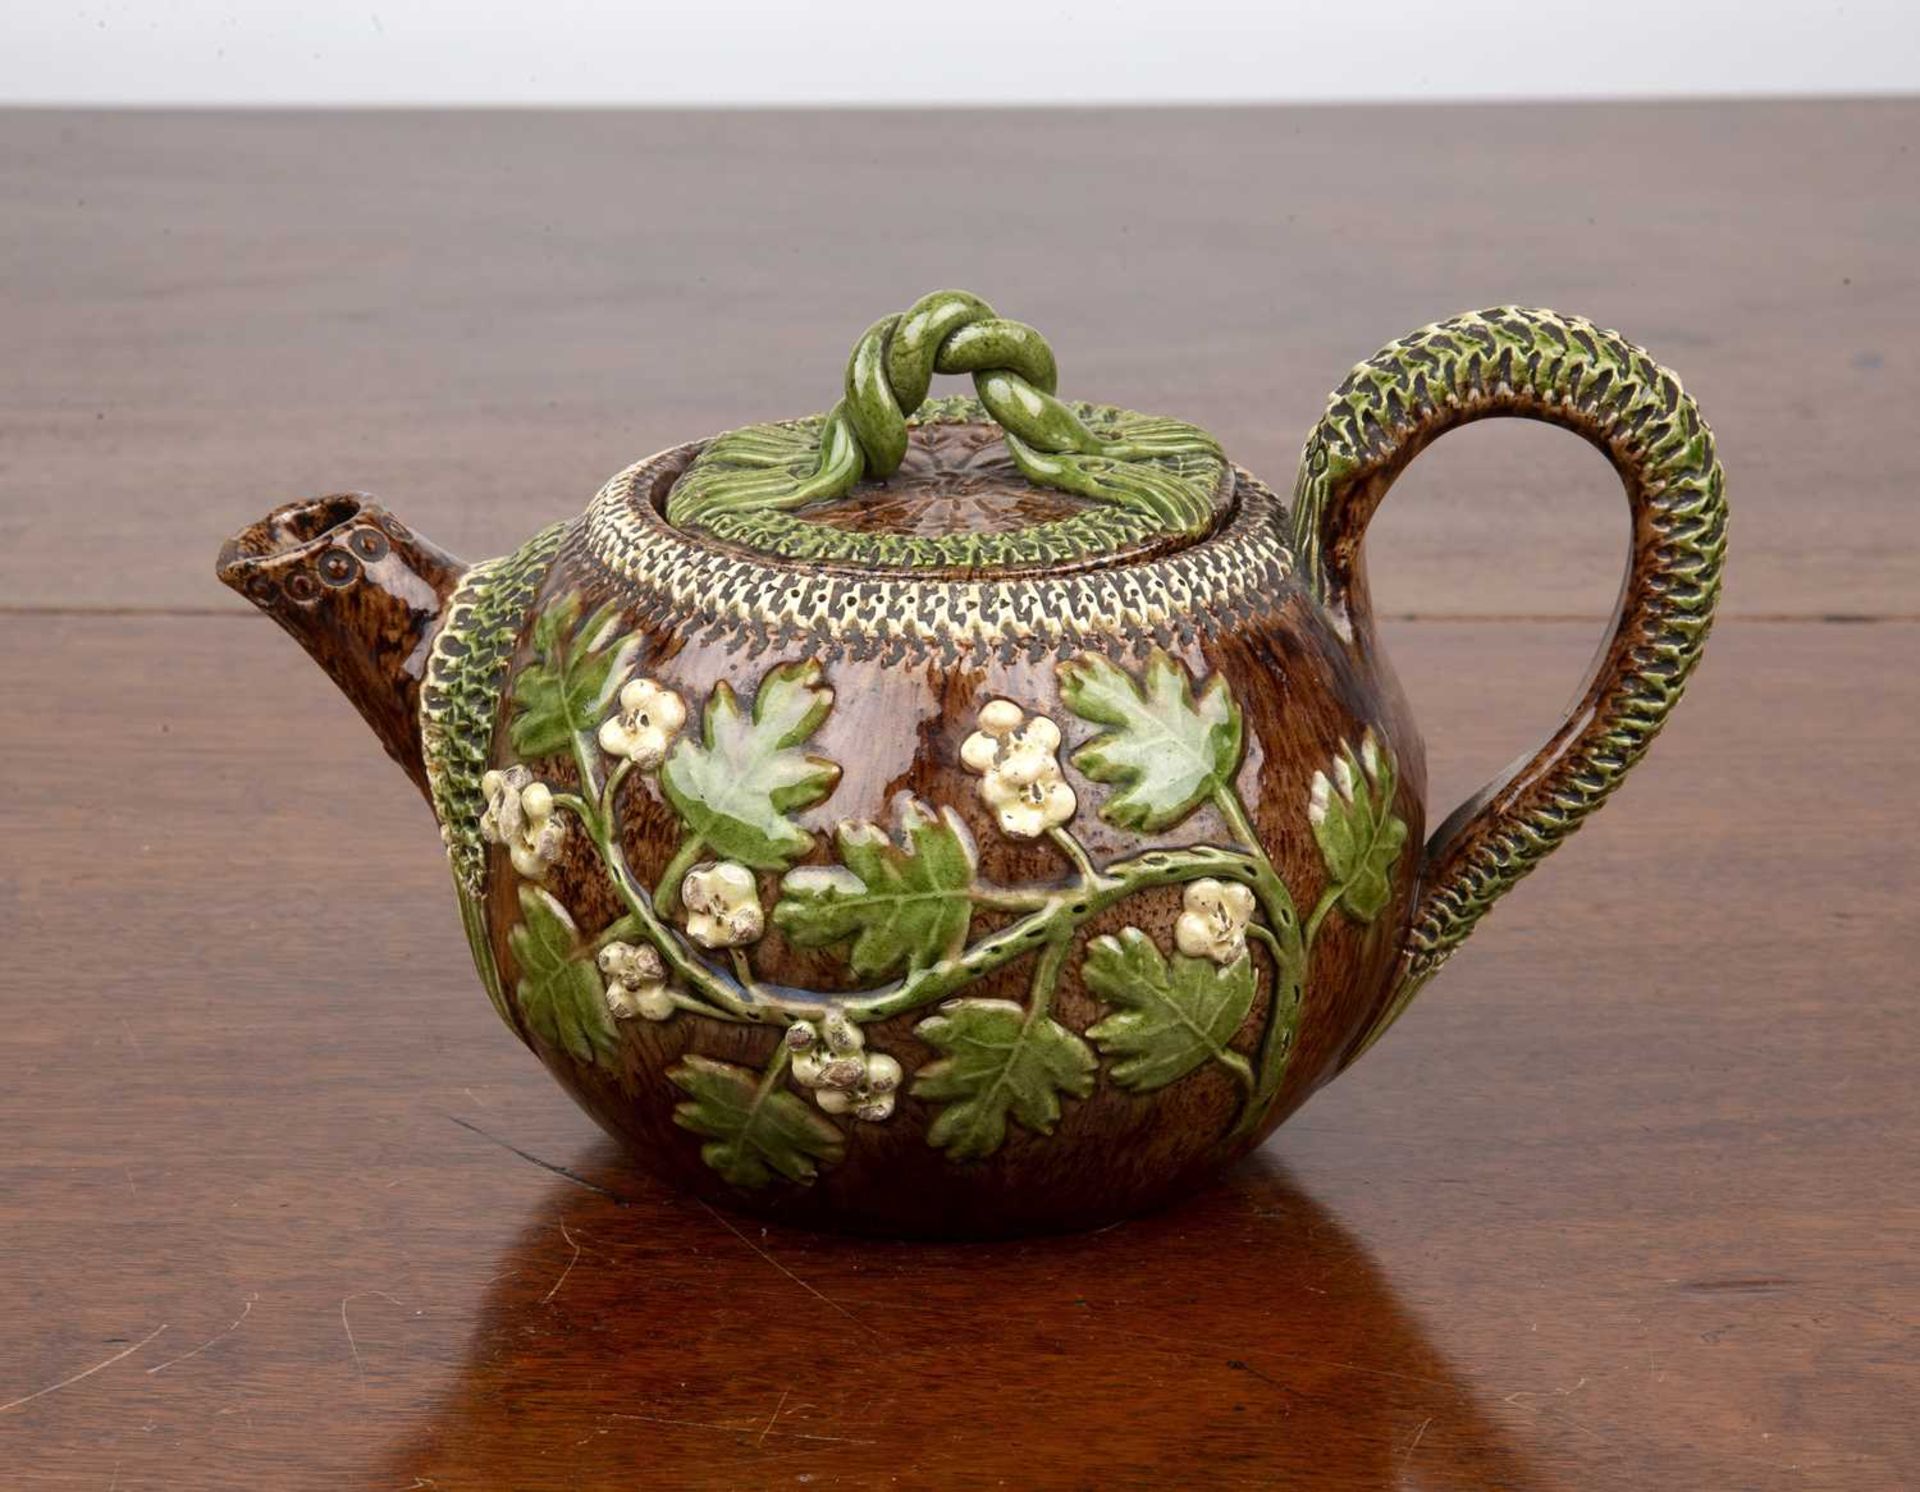 Rye pottery Bellevue hop ware teapot and cover 19th Century, decorated all over with a brown